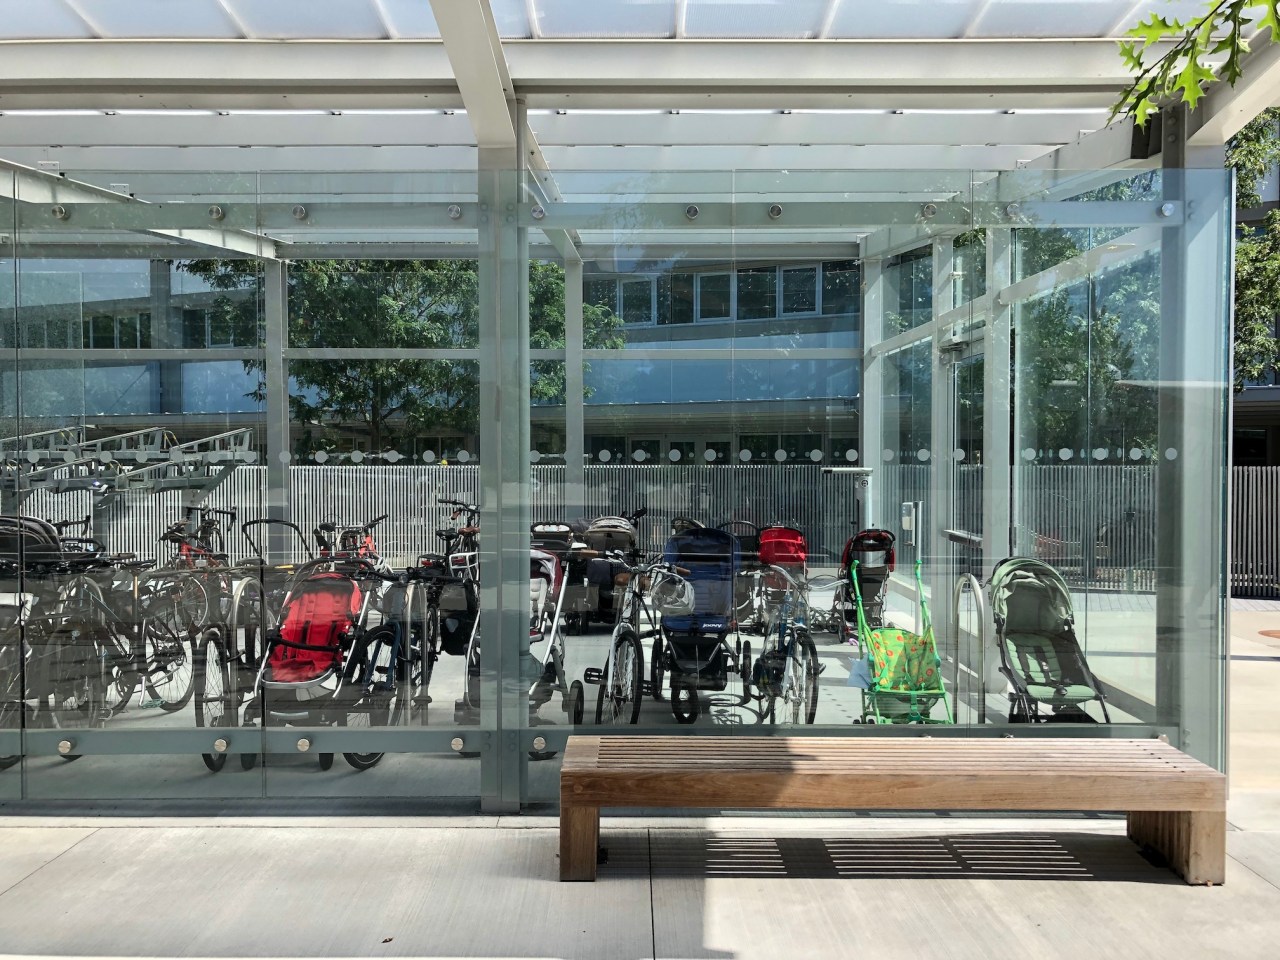 About a dozen baby strollers stored inside a glass-clad bike parking shed next to bike racks.